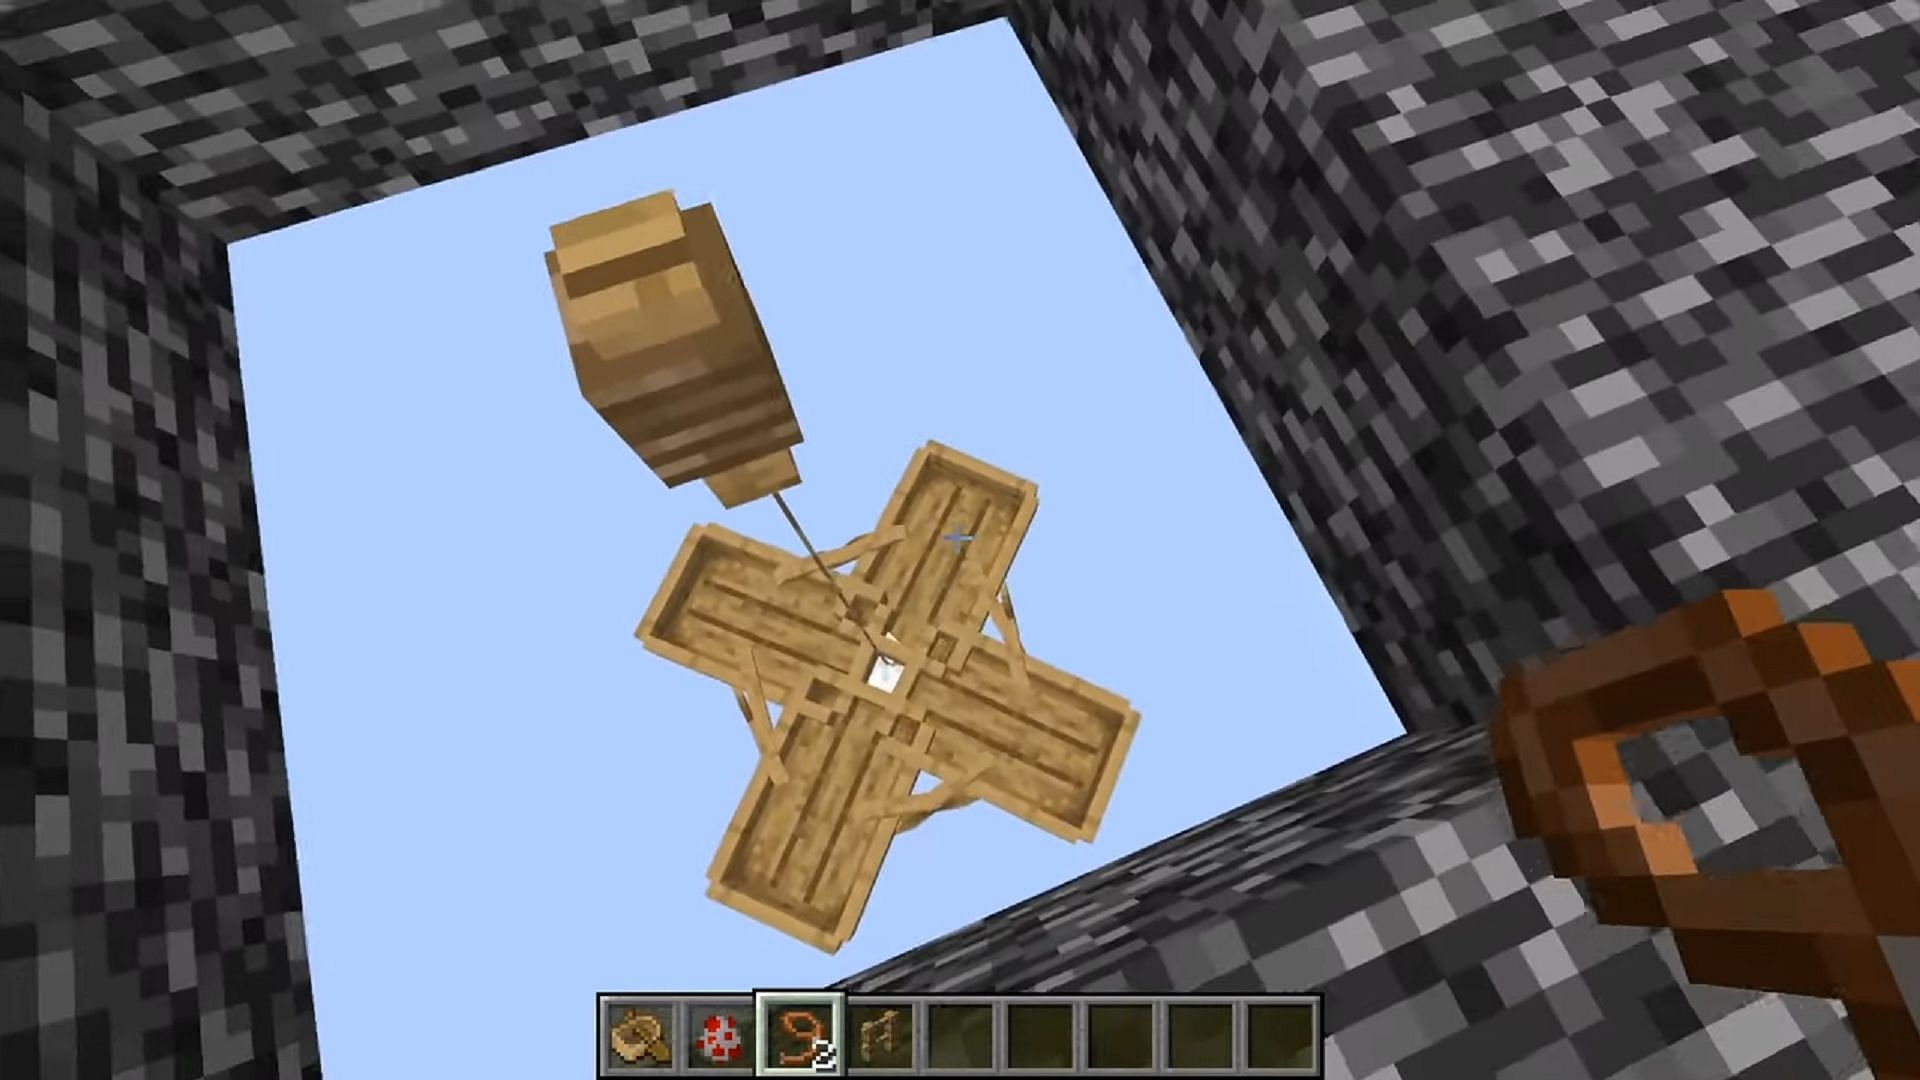 The right placement of blocks can create a starting point for building under bedrock (Image via Decapit8/YouTube)